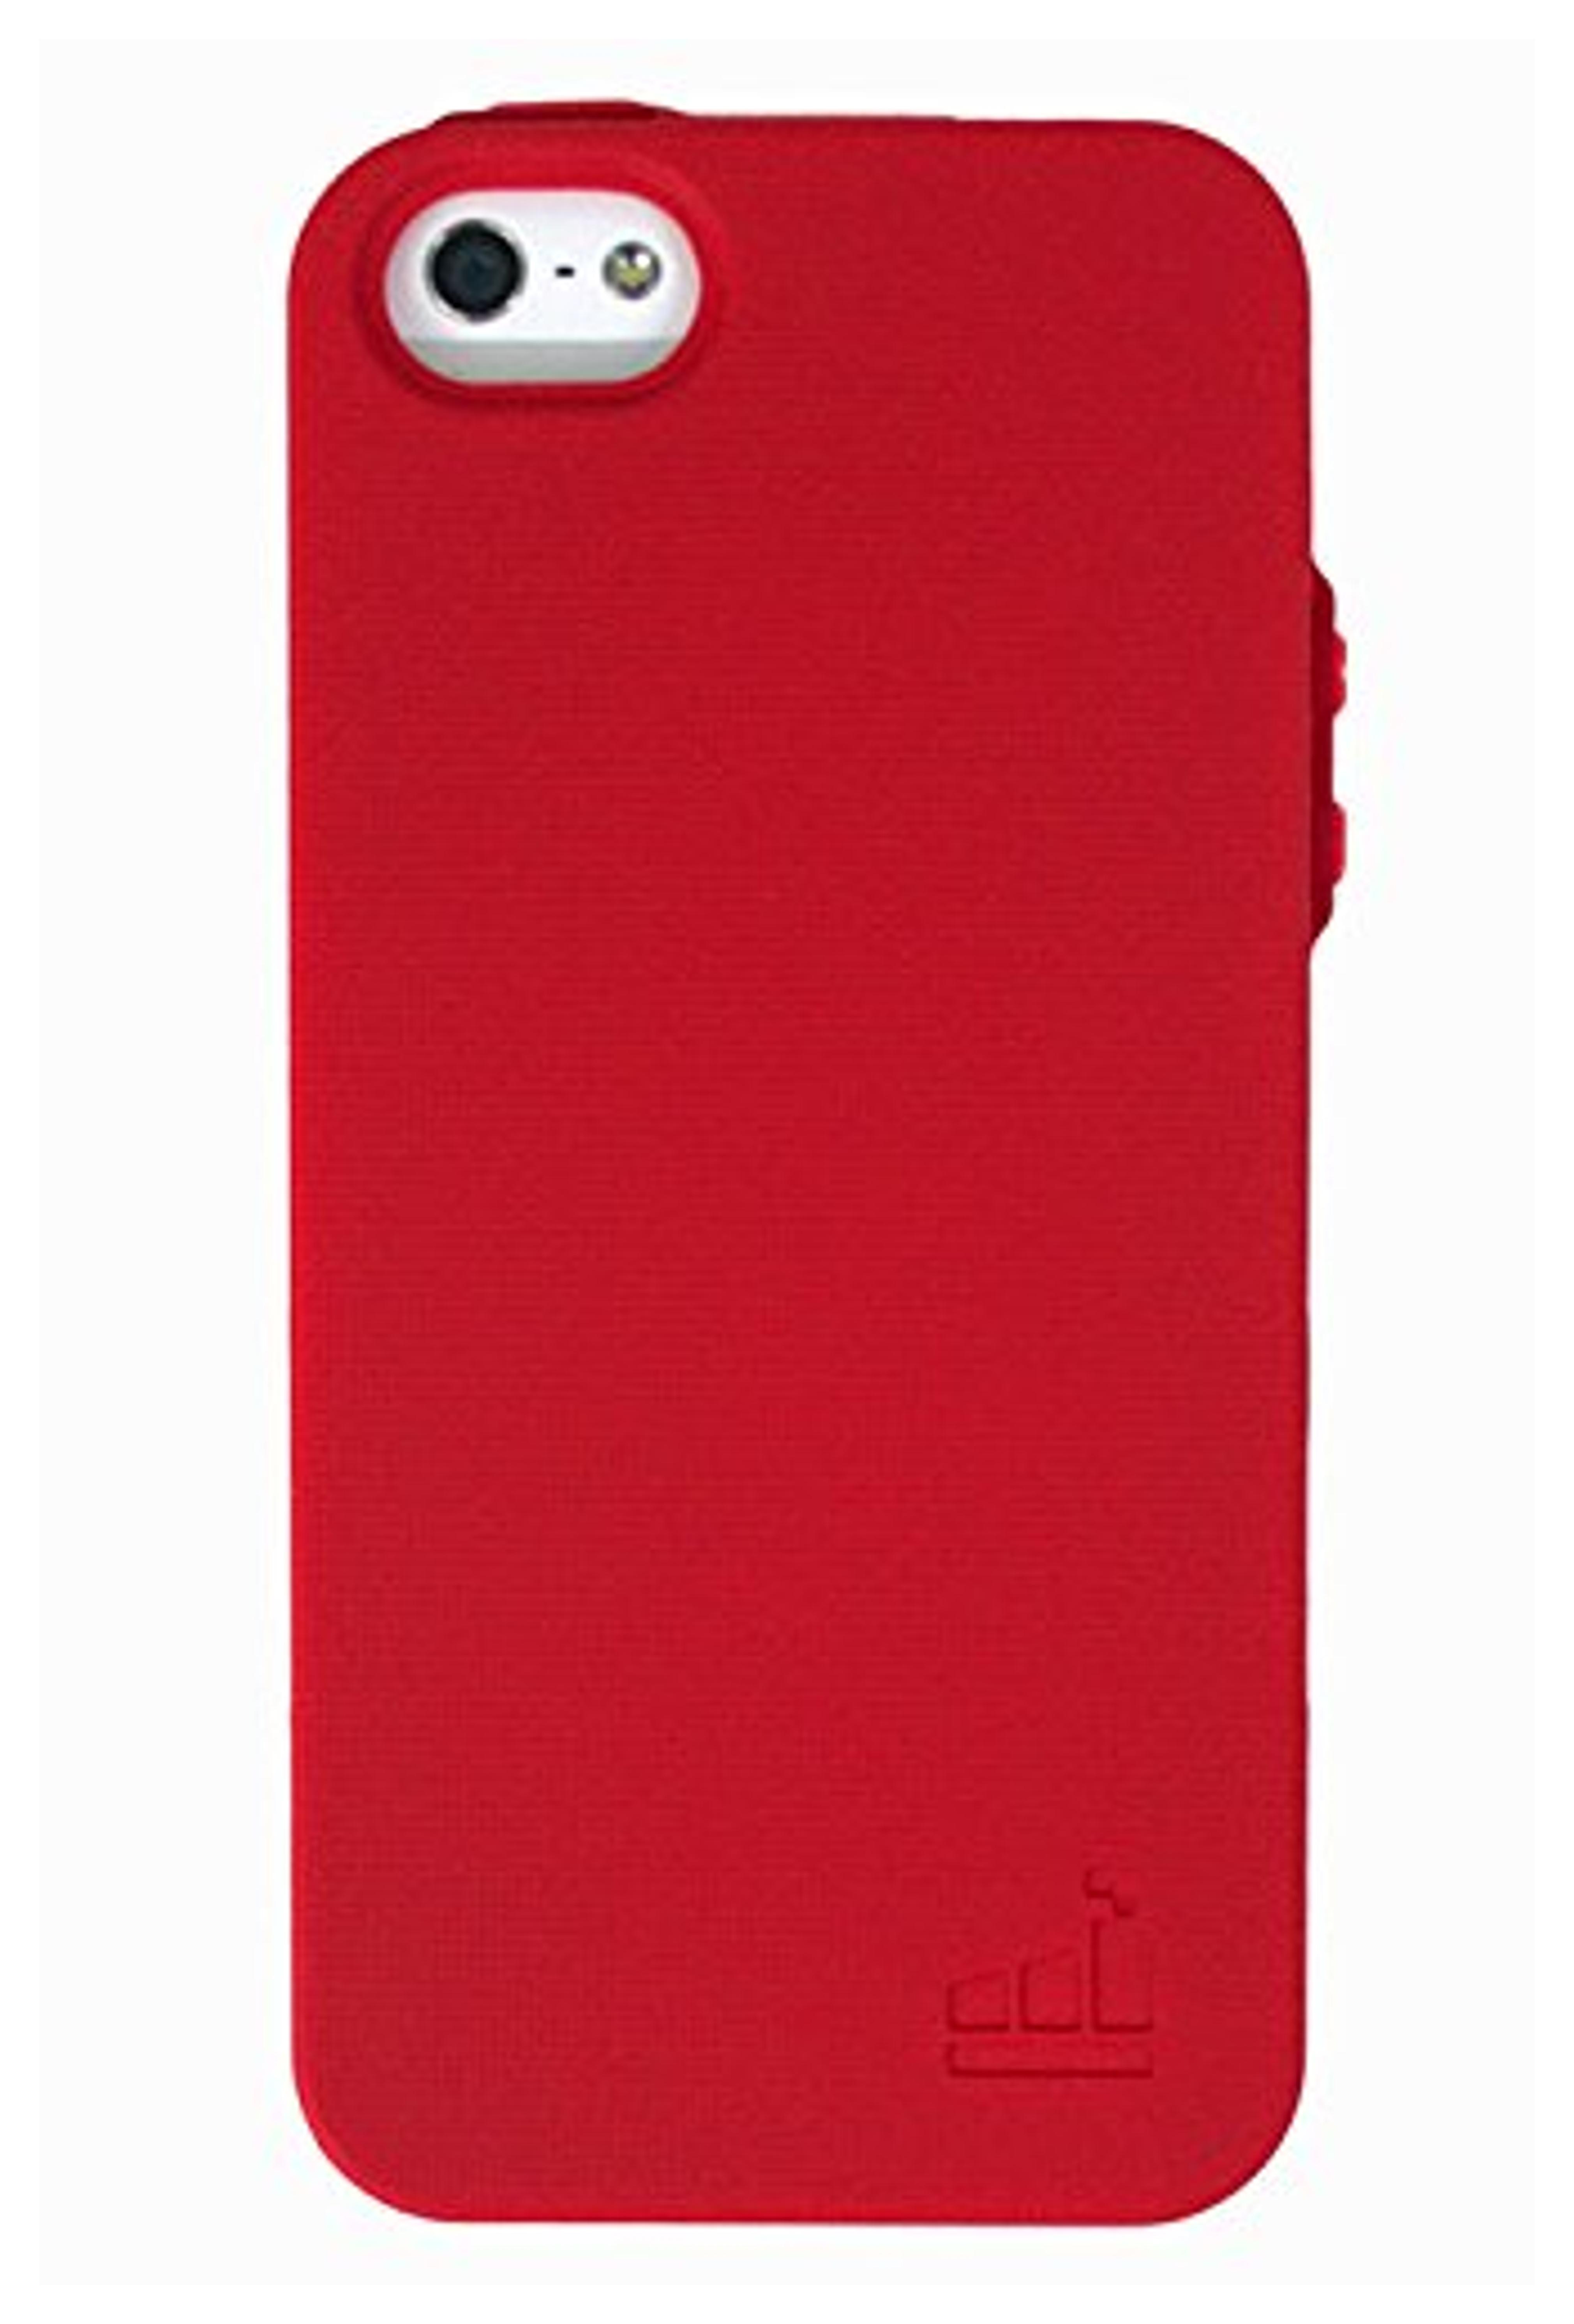 SlimClip Case V2 for iPhone 5 & iPhone 5S by theWTFactory (Red)